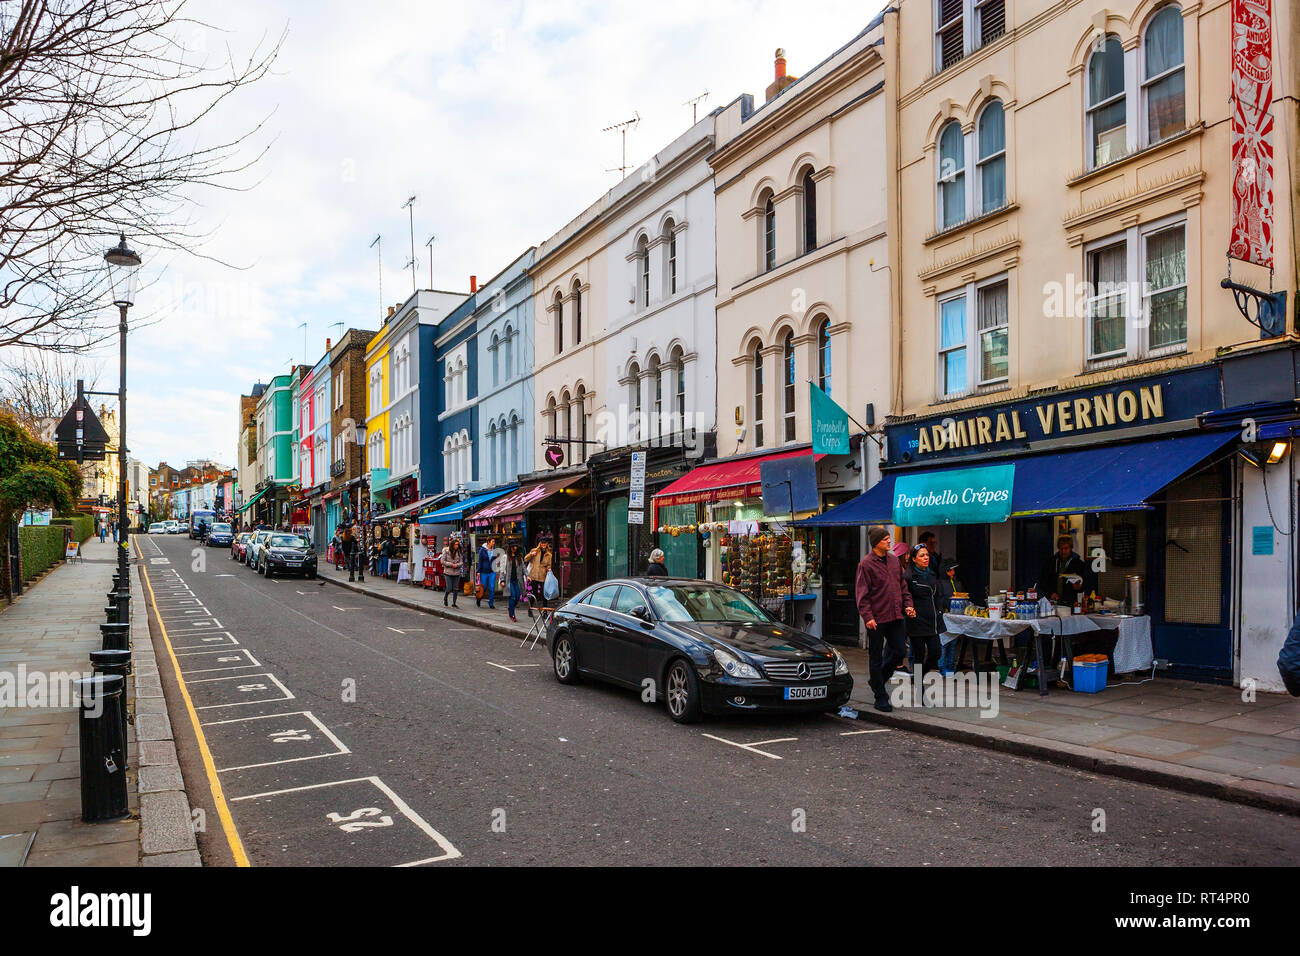 Brightly Coloured Shops and Houses, Portobello Road, Notting Hill, London Stock Photo